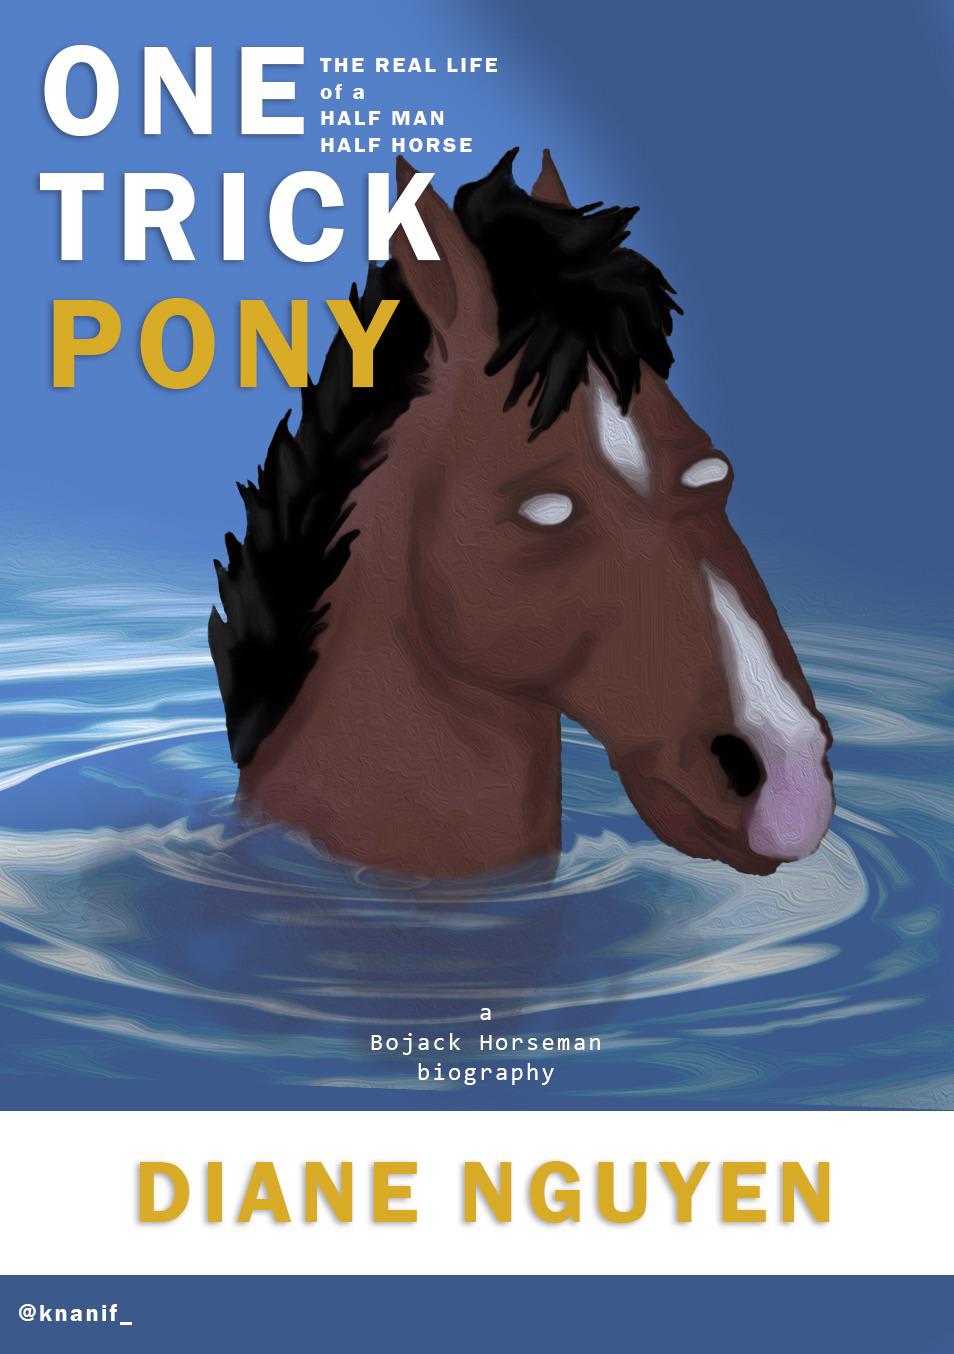 Concept art for “One Trick Pony.” First time trying to design a book cover. Work done on photoshop.